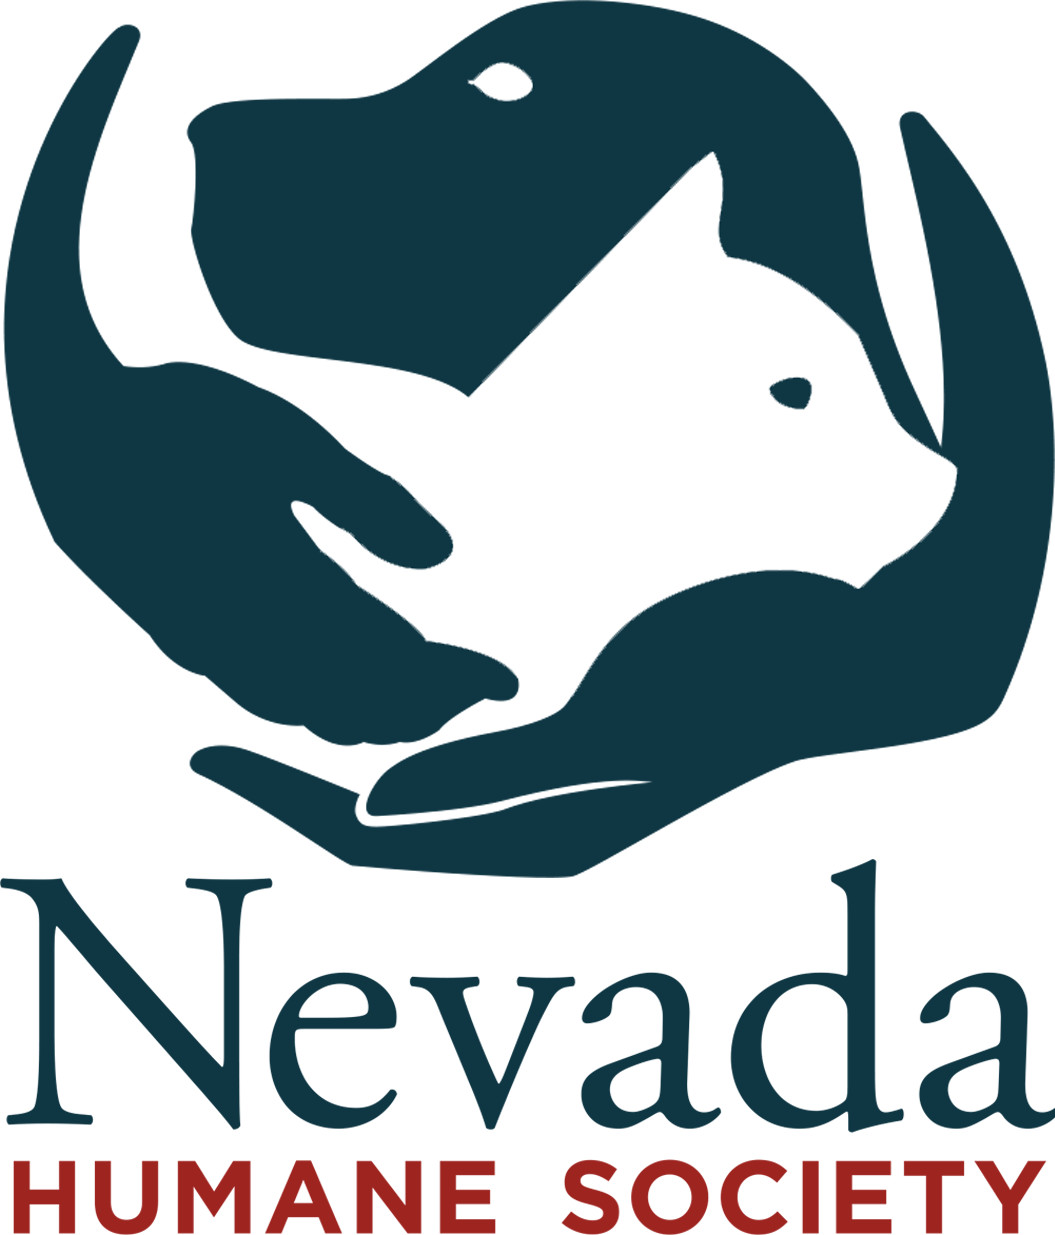 Day of Service - Help our Furry Friends at the Nevada Humane Society